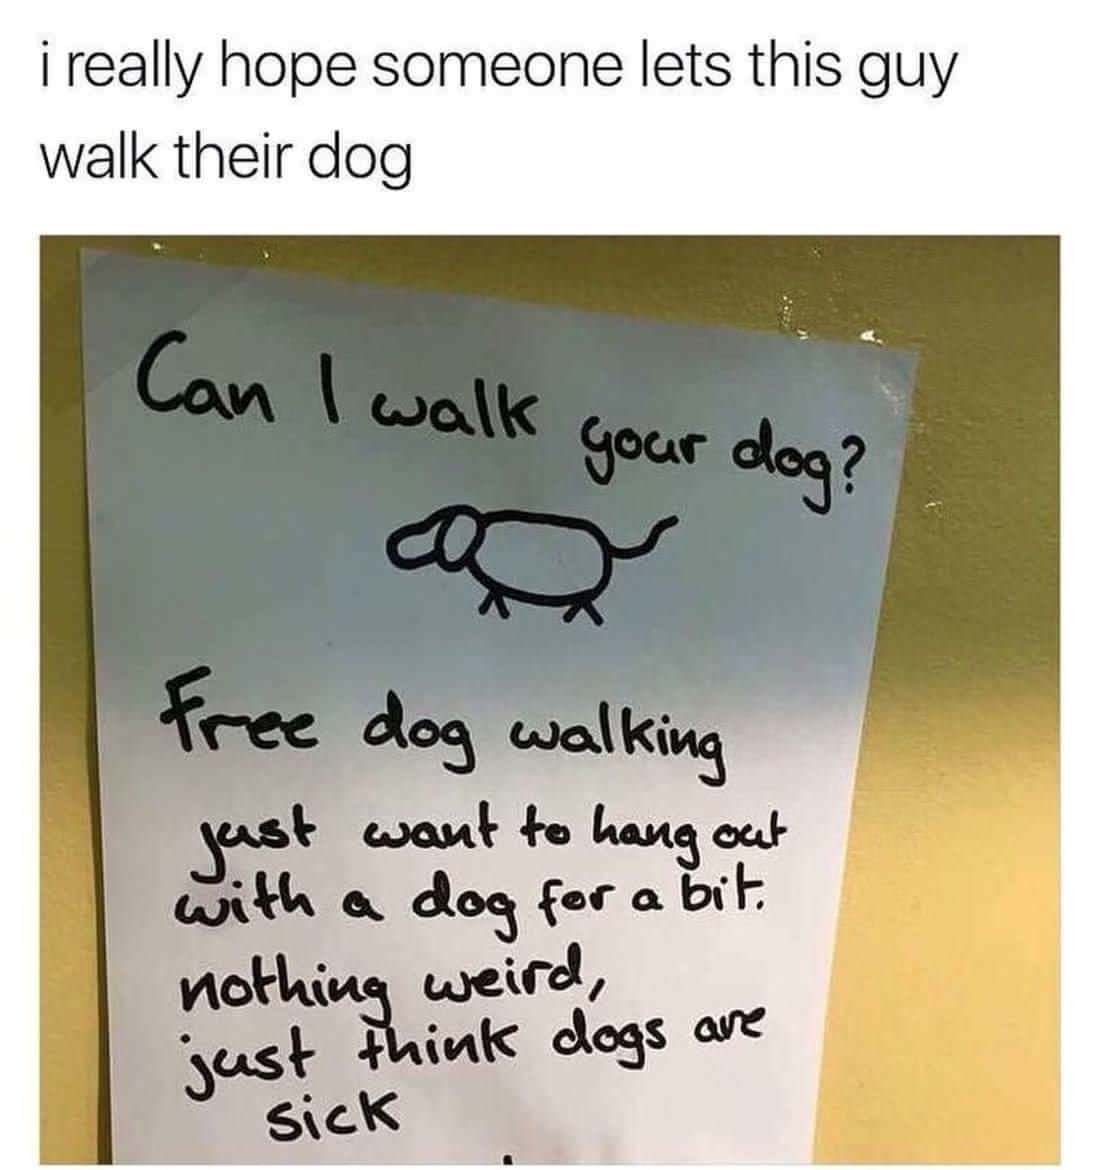 funny memes to start the day off - i really hope someone lets this guy walk their dog Can I walk your dog? free dog walking just want to hang out with a dog for a bit. nothing weird, just think dogs are sick